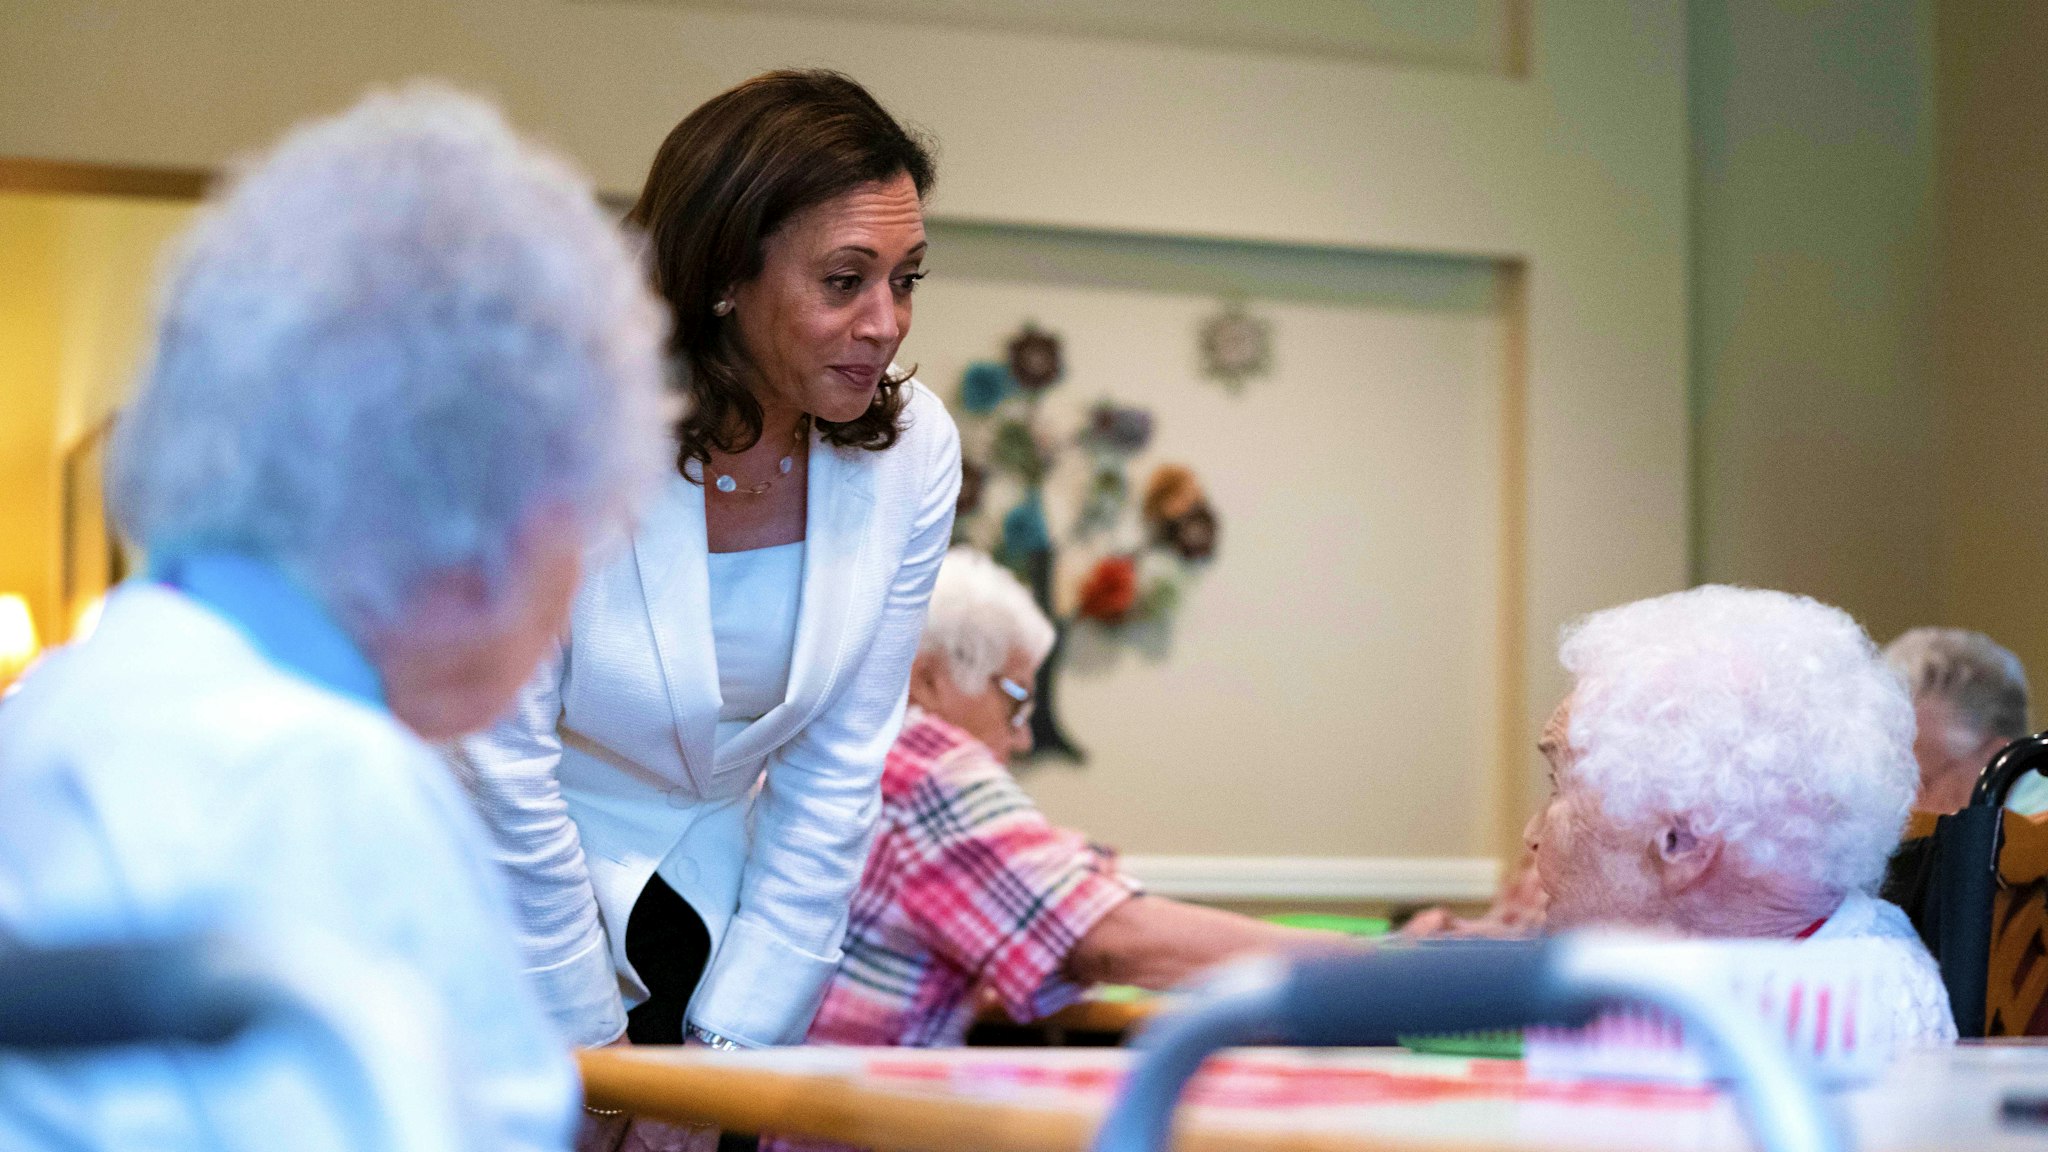 2020 Democratic Presidential hopeful Senator Kamala Harris (D-CA) greets residents and staff during a campaign stop at the Bickford Senior Living Center on August 12, 2019 in Muscatine, Iowa. - Harris finishes a multi-day bus tour across Iowa today. (Photo by Alex Edelman / AFP)